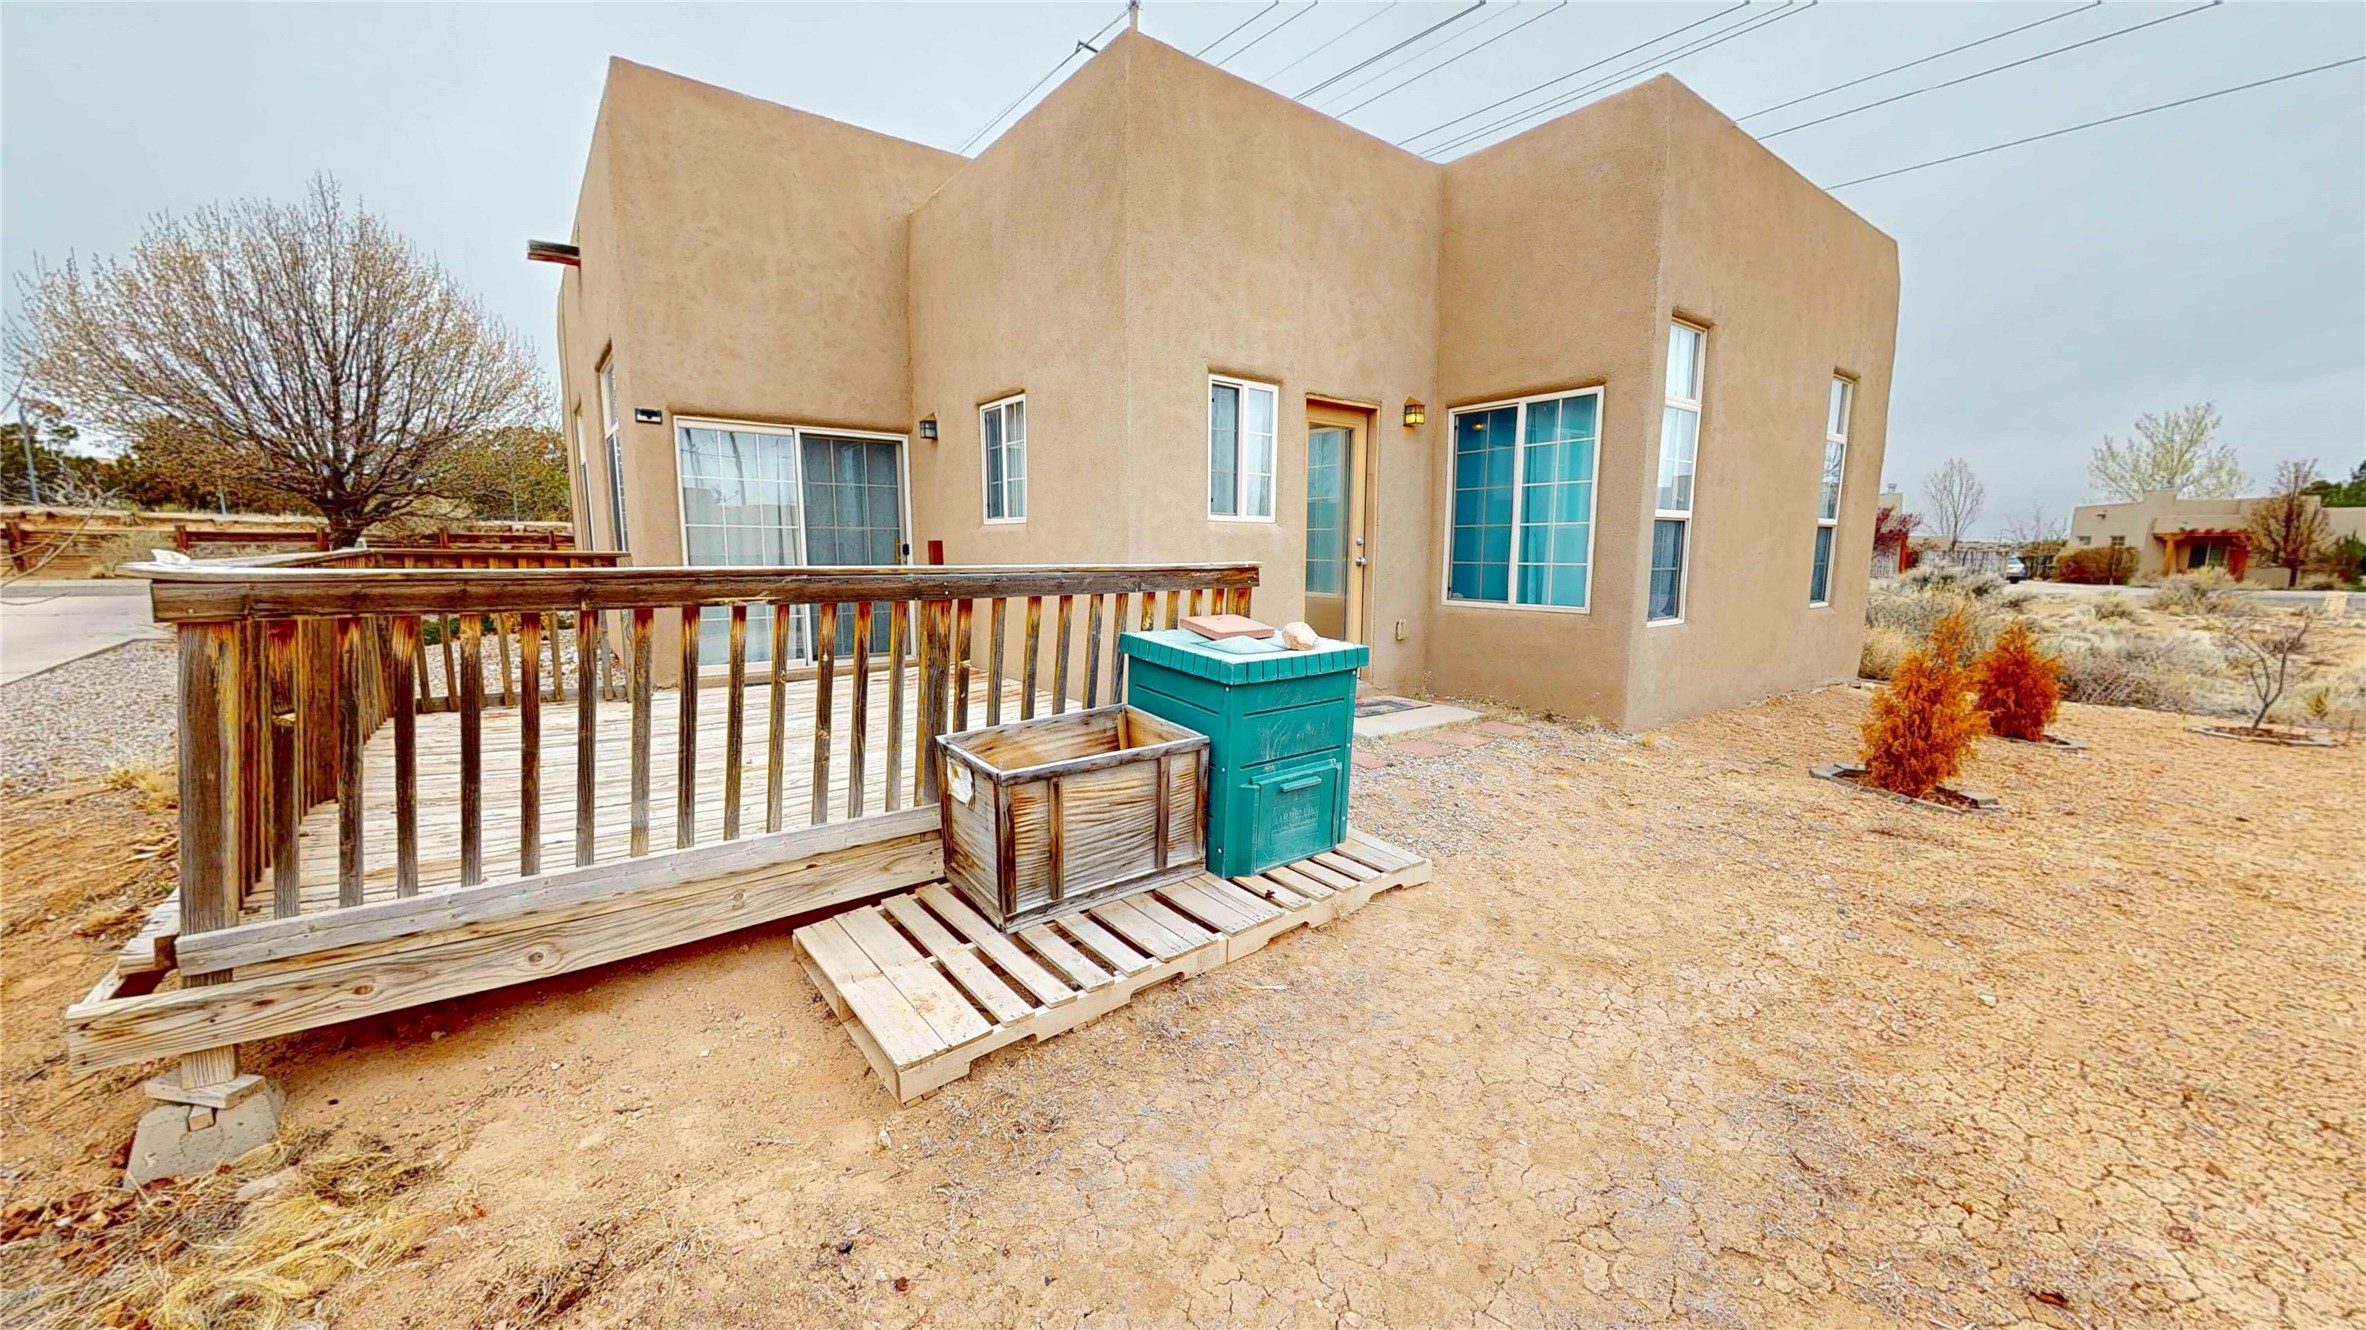 4129 New Moon, Santa Fe, New Mexico 87507, 3 Bedrooms Bedrooms, ,2 BathroomsBathrooms,Residential,For Sale,4129 New Moon,202401108